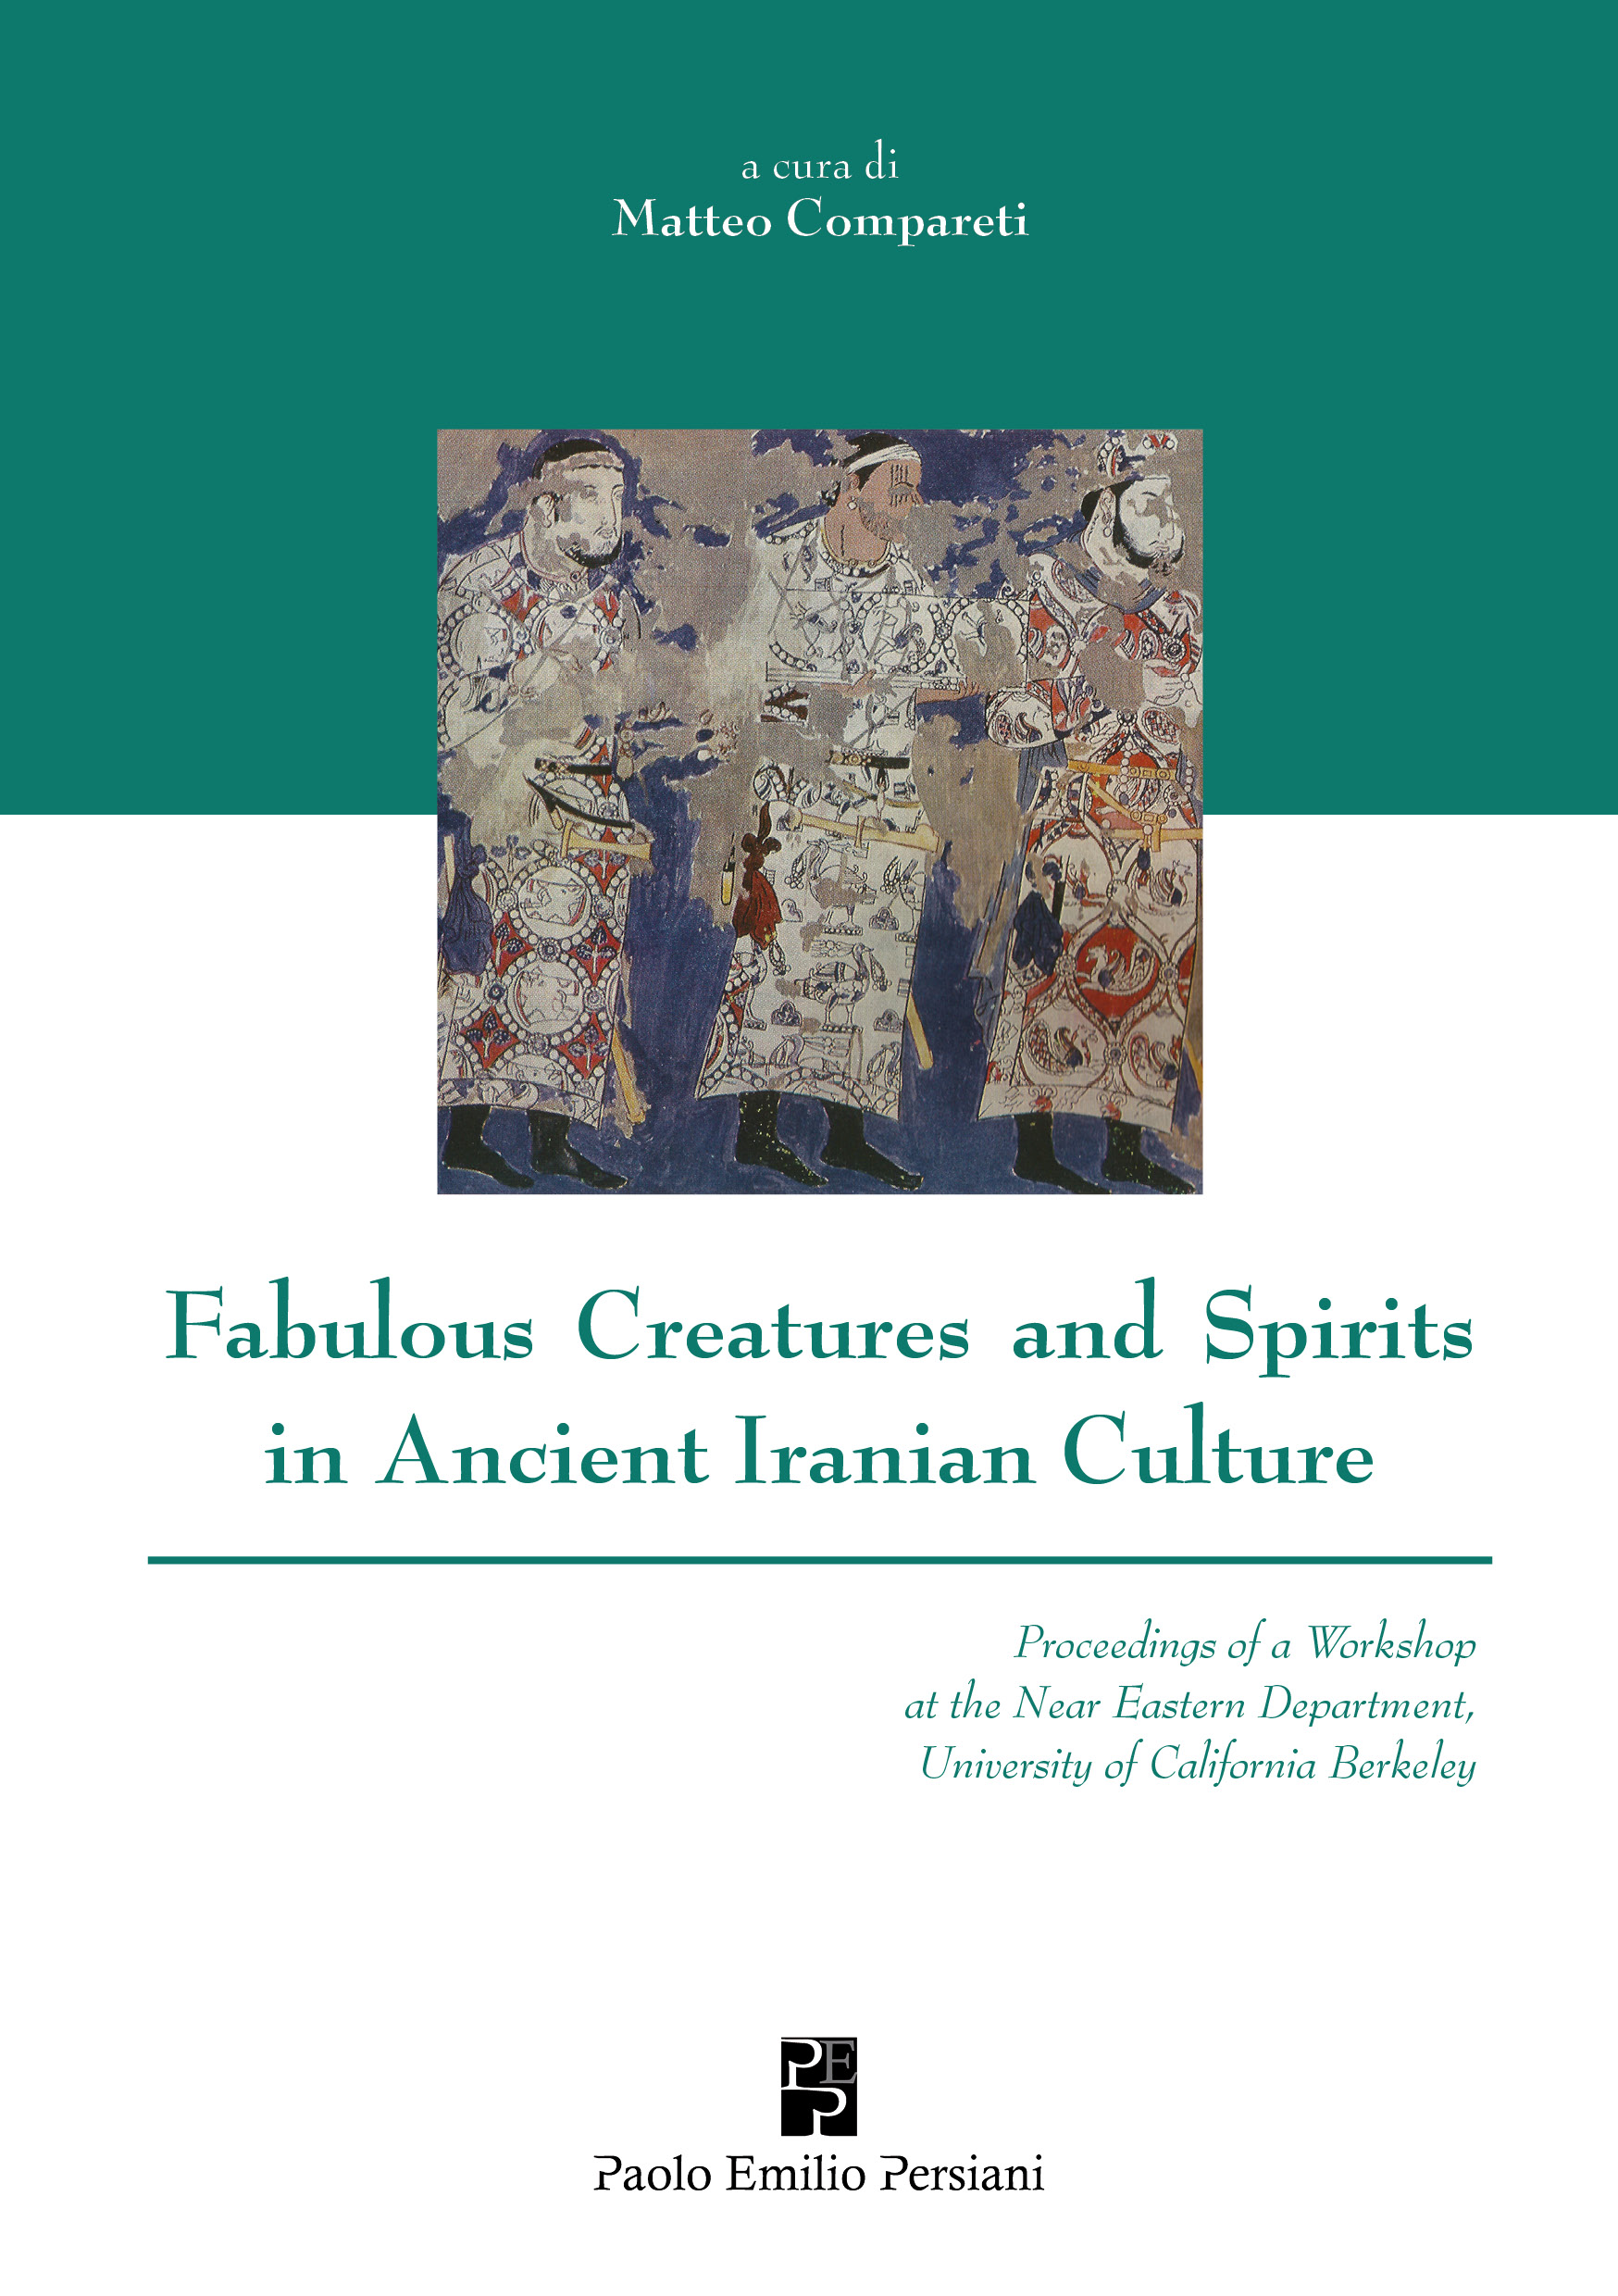 Fabulous Creatures and Spirits in Ancient Iranian Culture